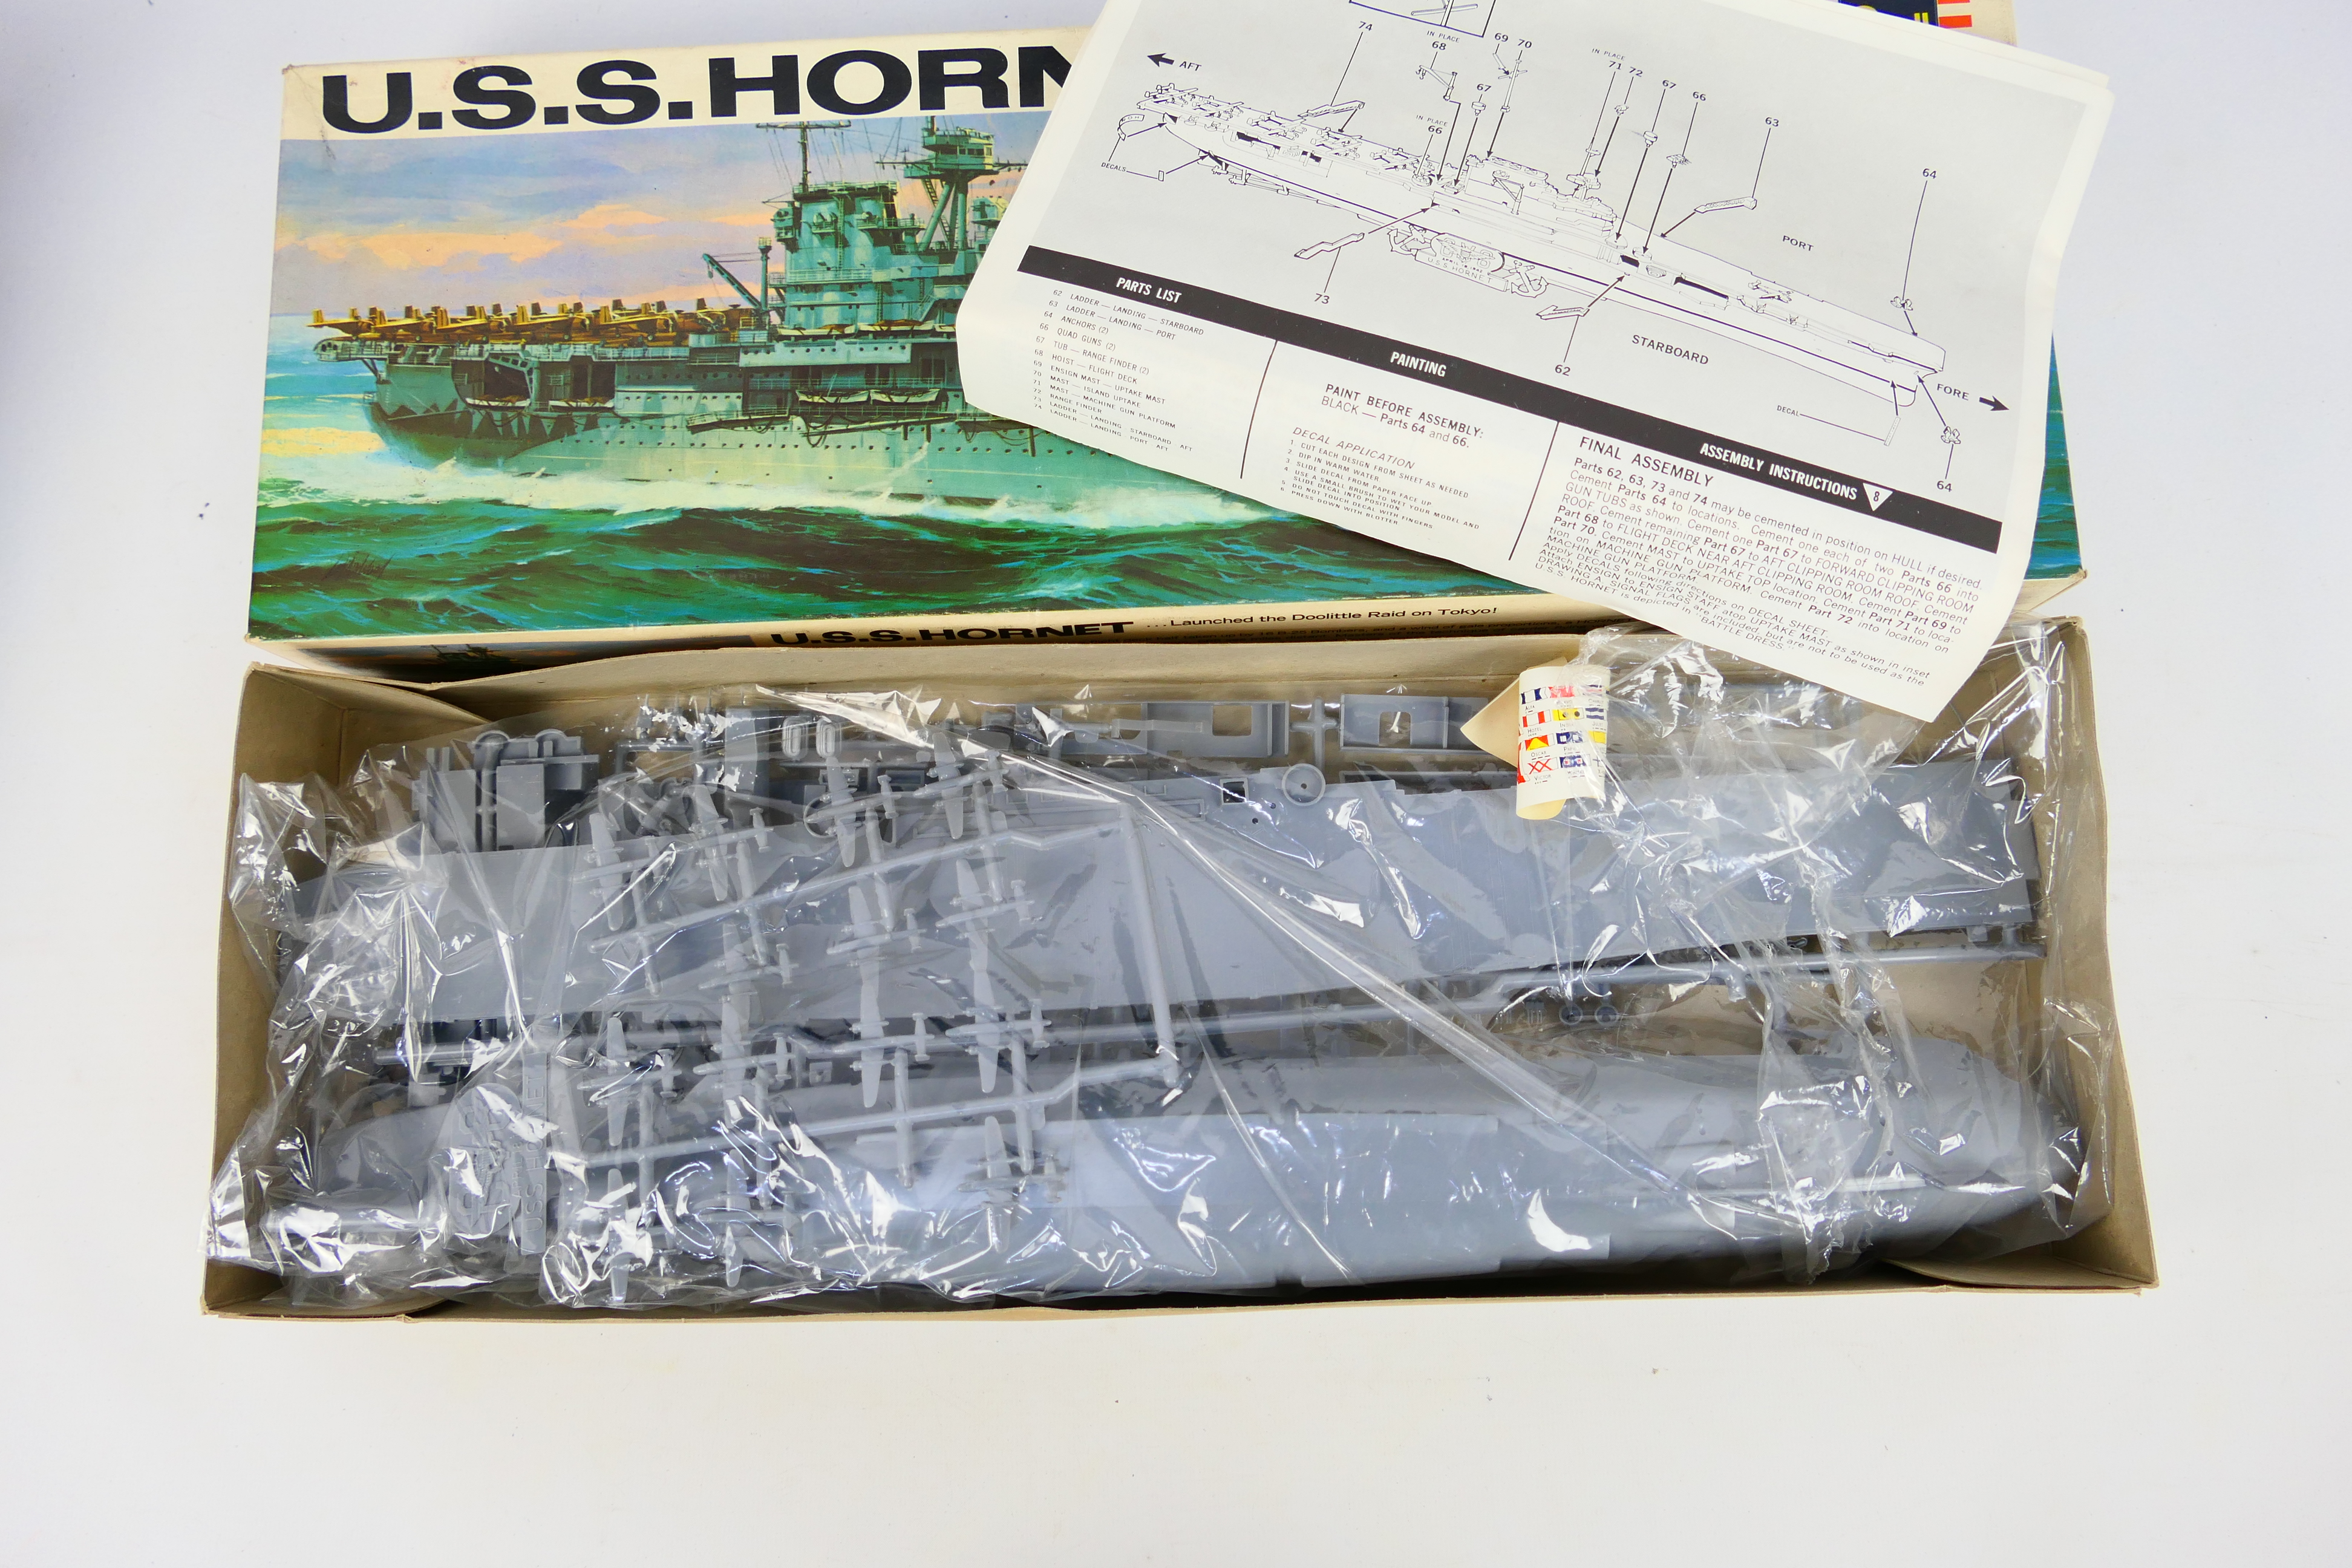 Airfix - Revell - A group of vintage model kits, HMS Tiger in 1:600 scale # 03201-0, - Image 5 of 14